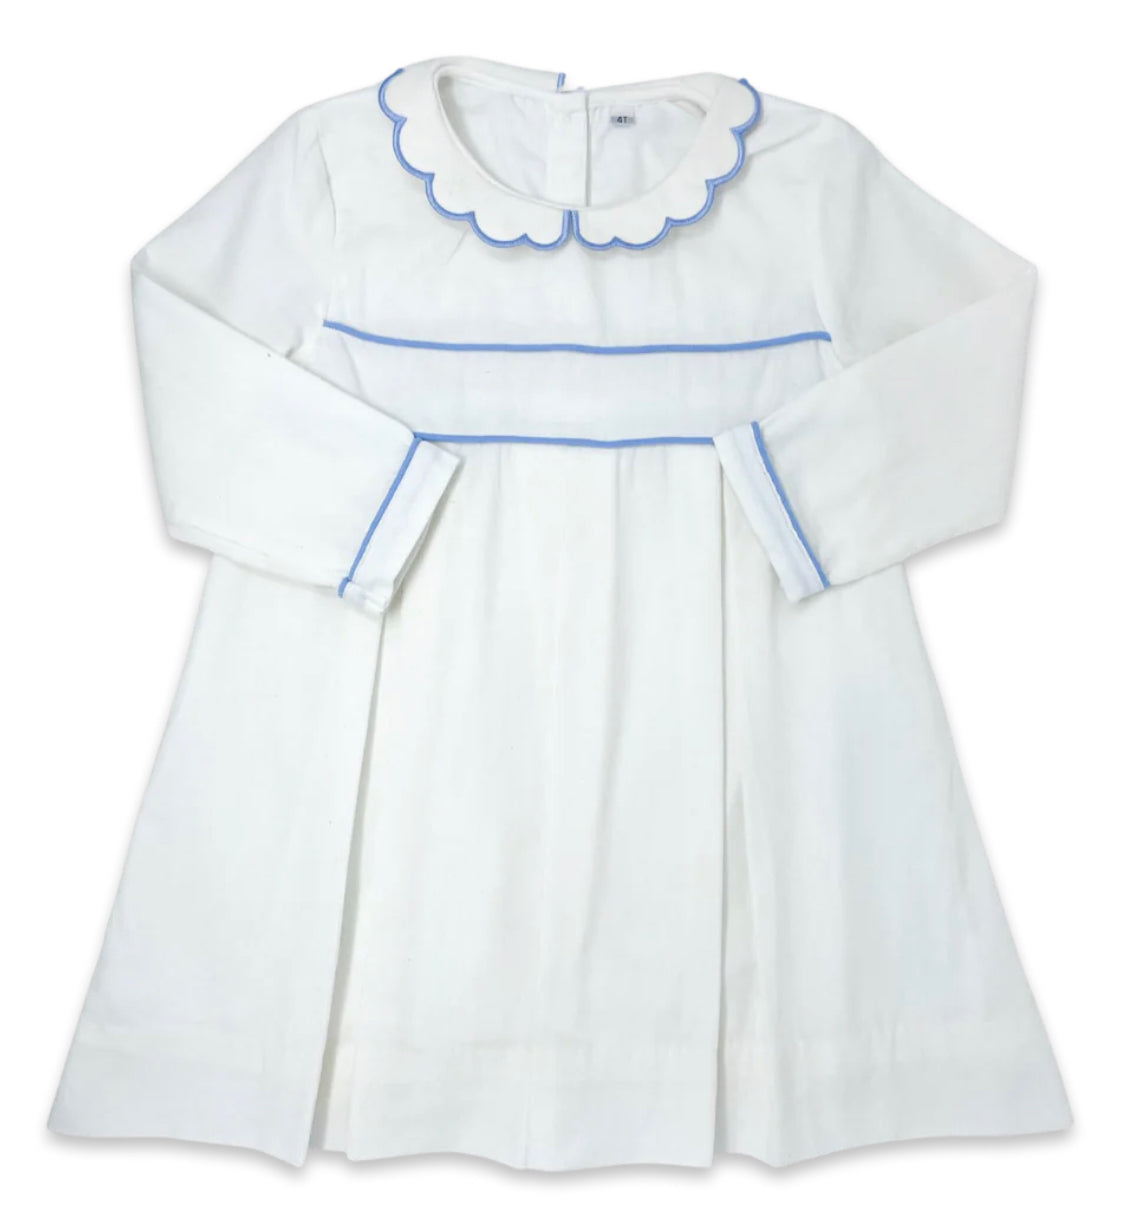 Holly Dress - White with Light Blue Corduroy